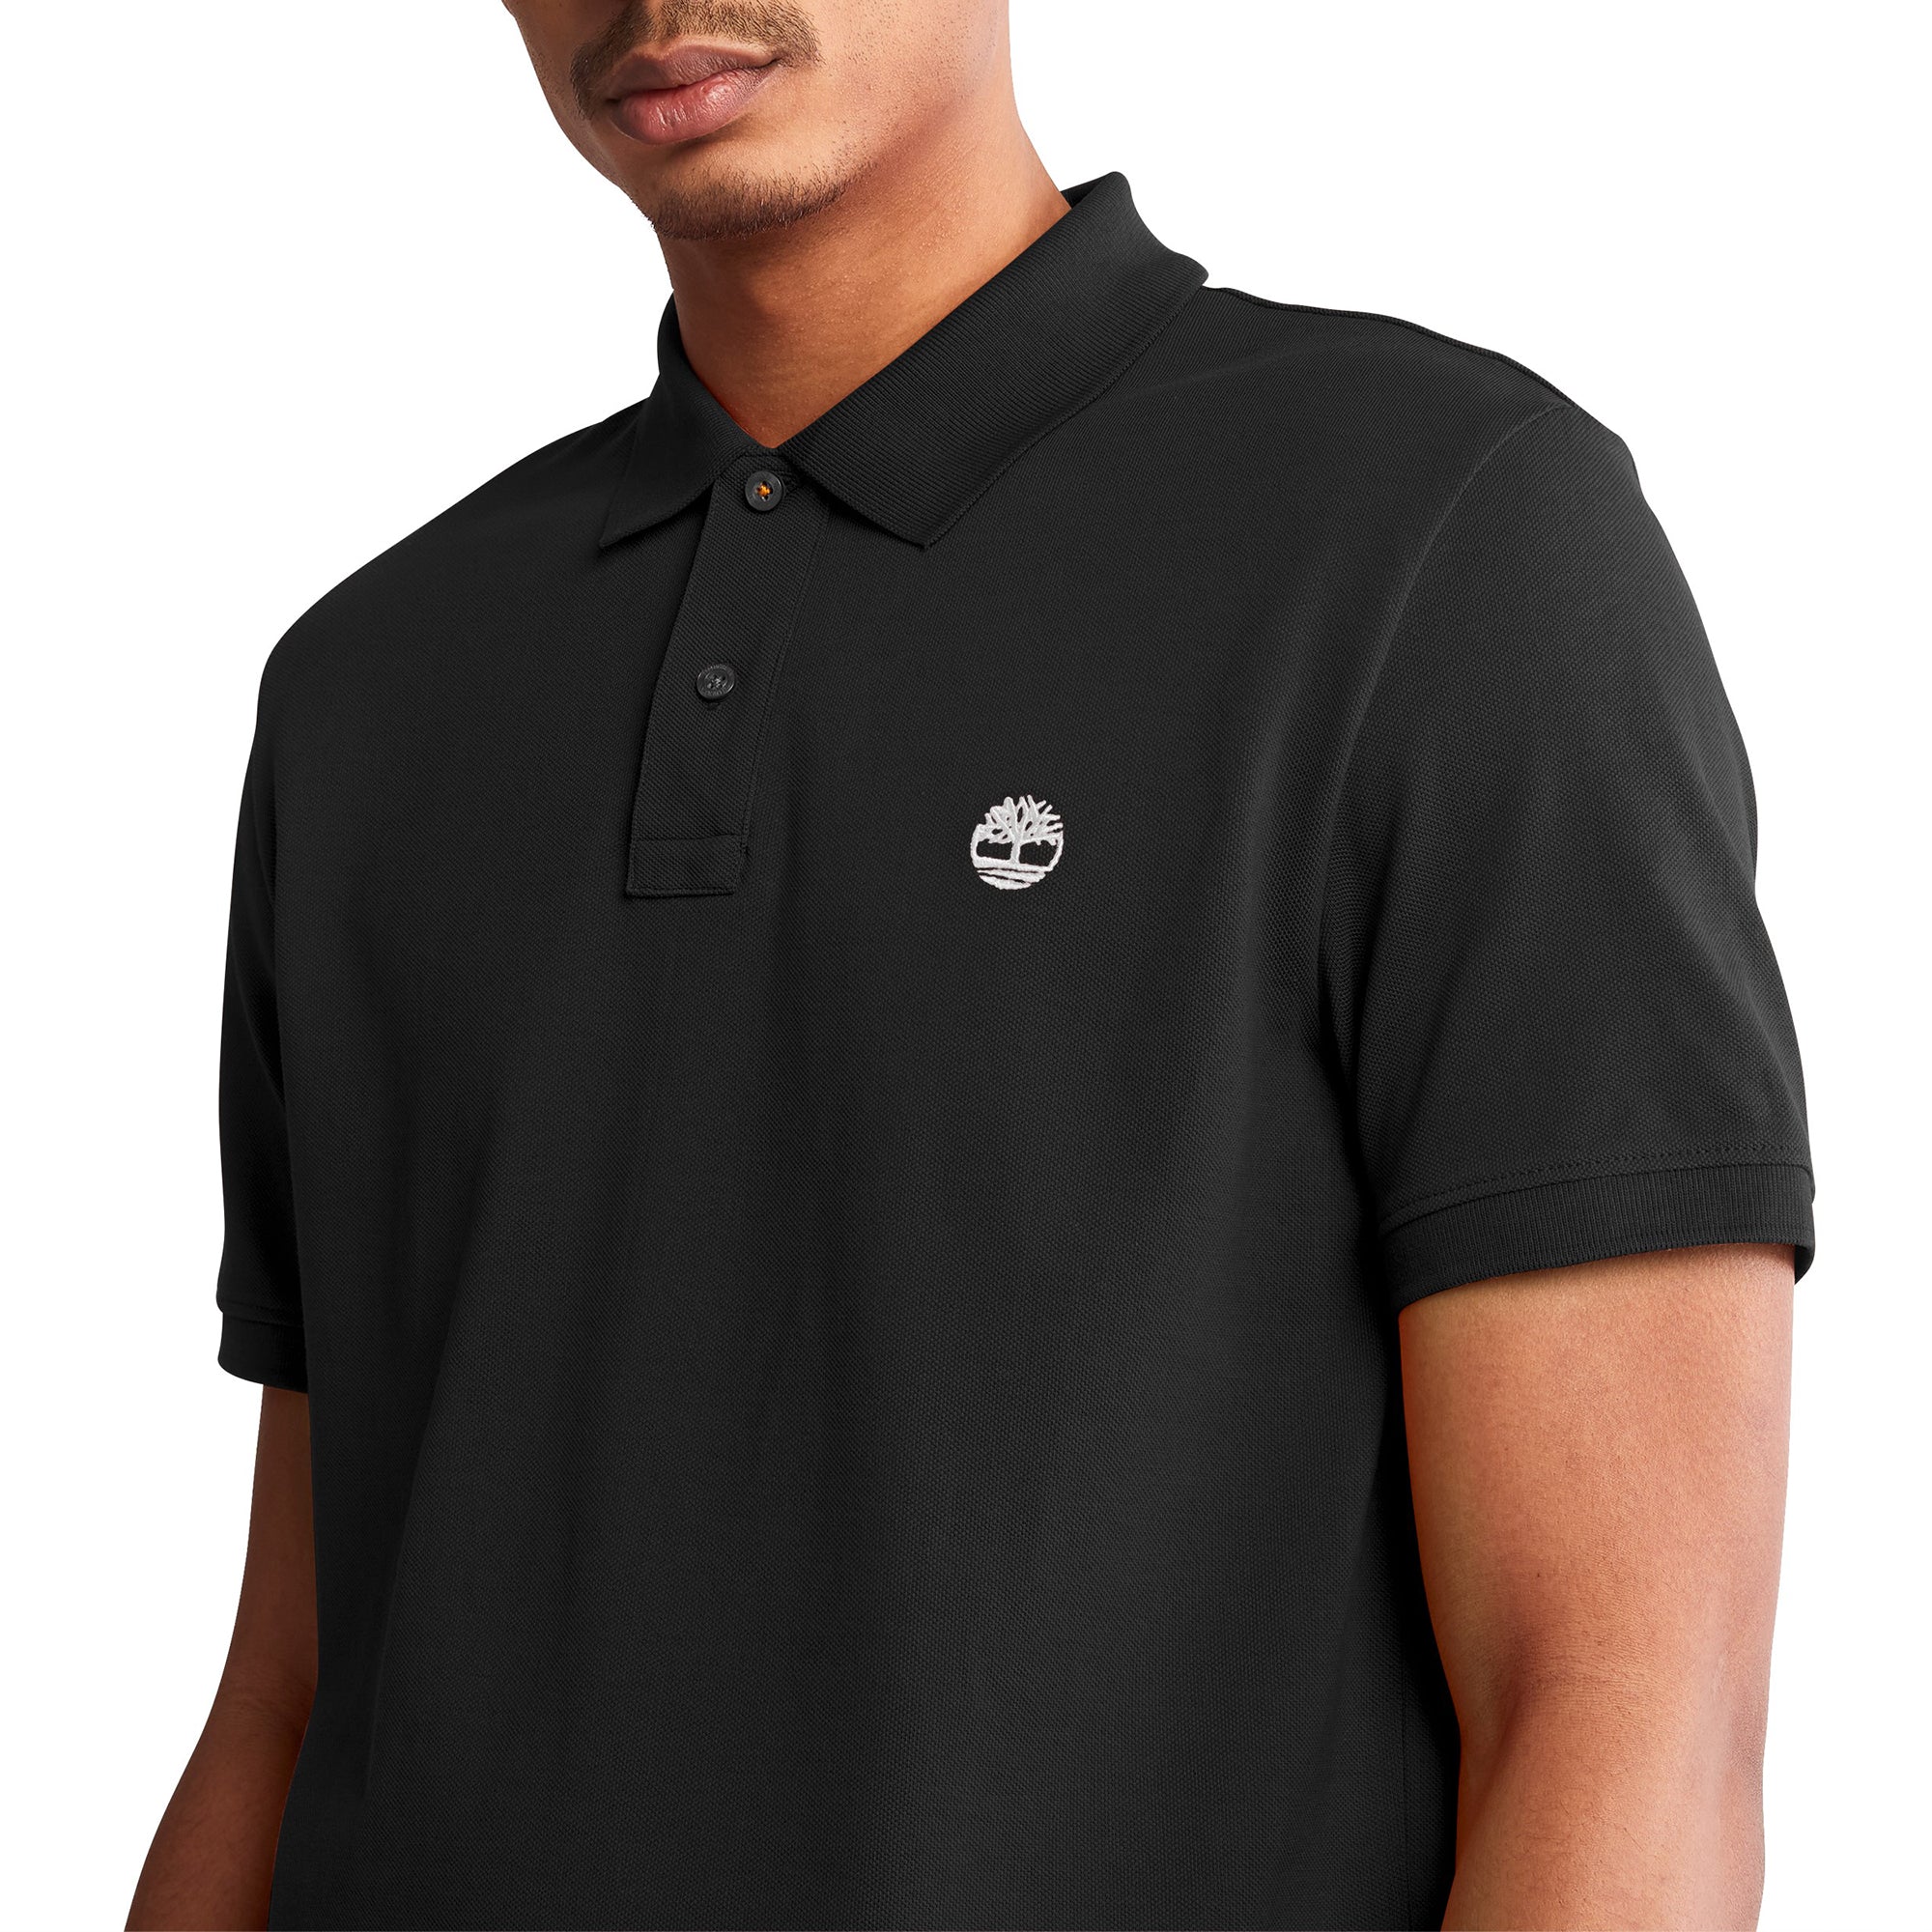 Timberland Millers River Pique Polo - Black